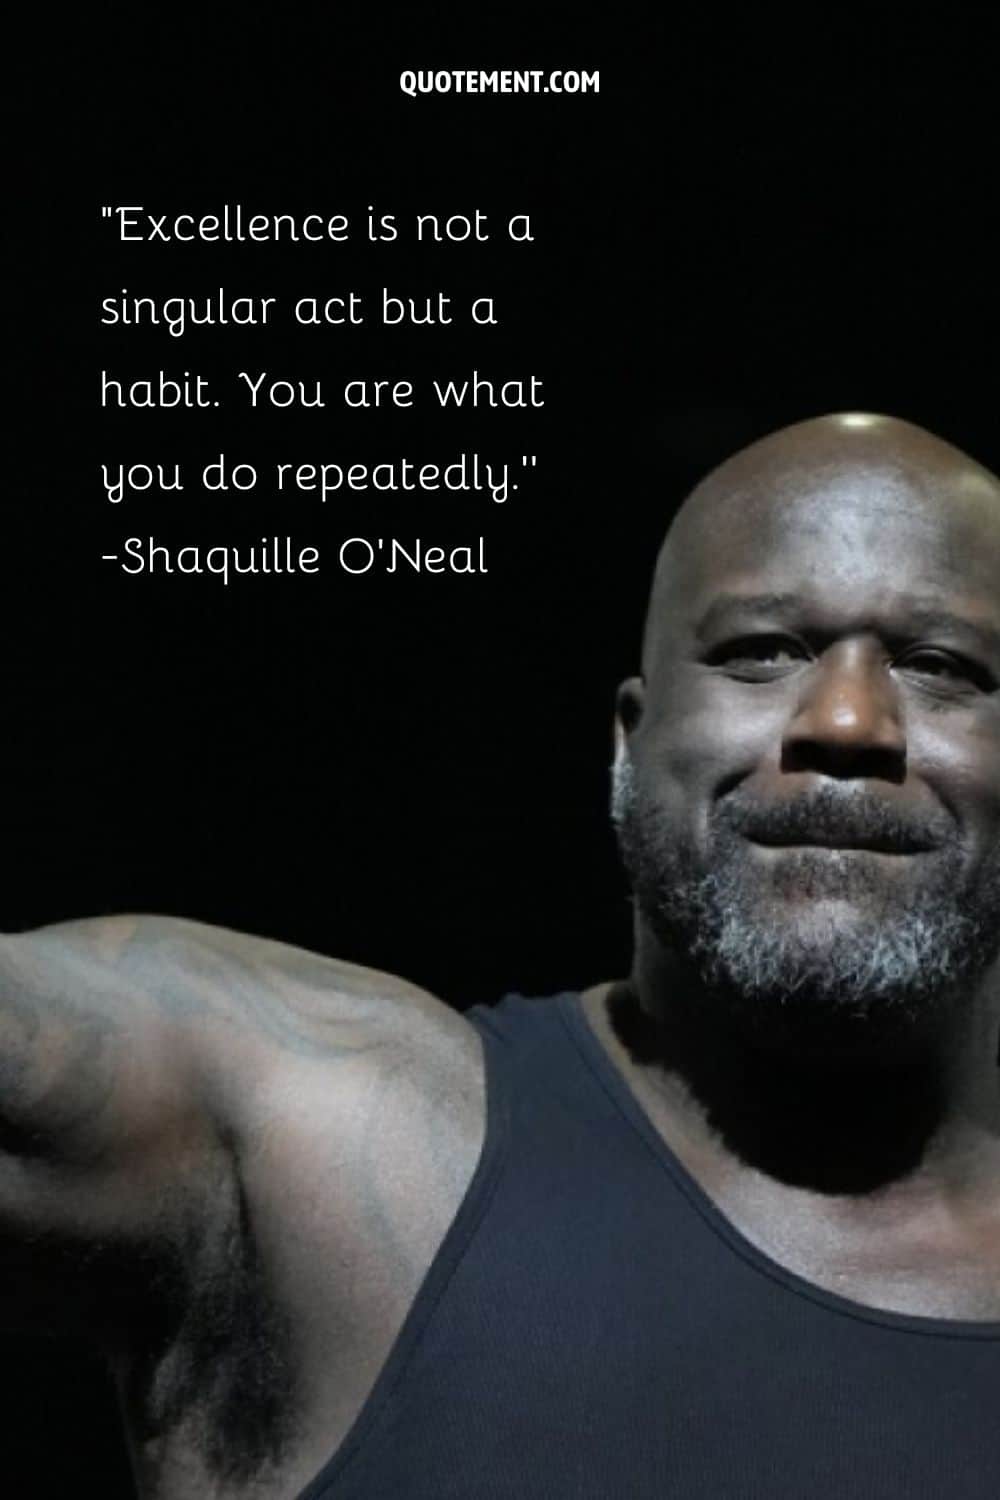 Shaquille O'Neal image representing quote about basketball